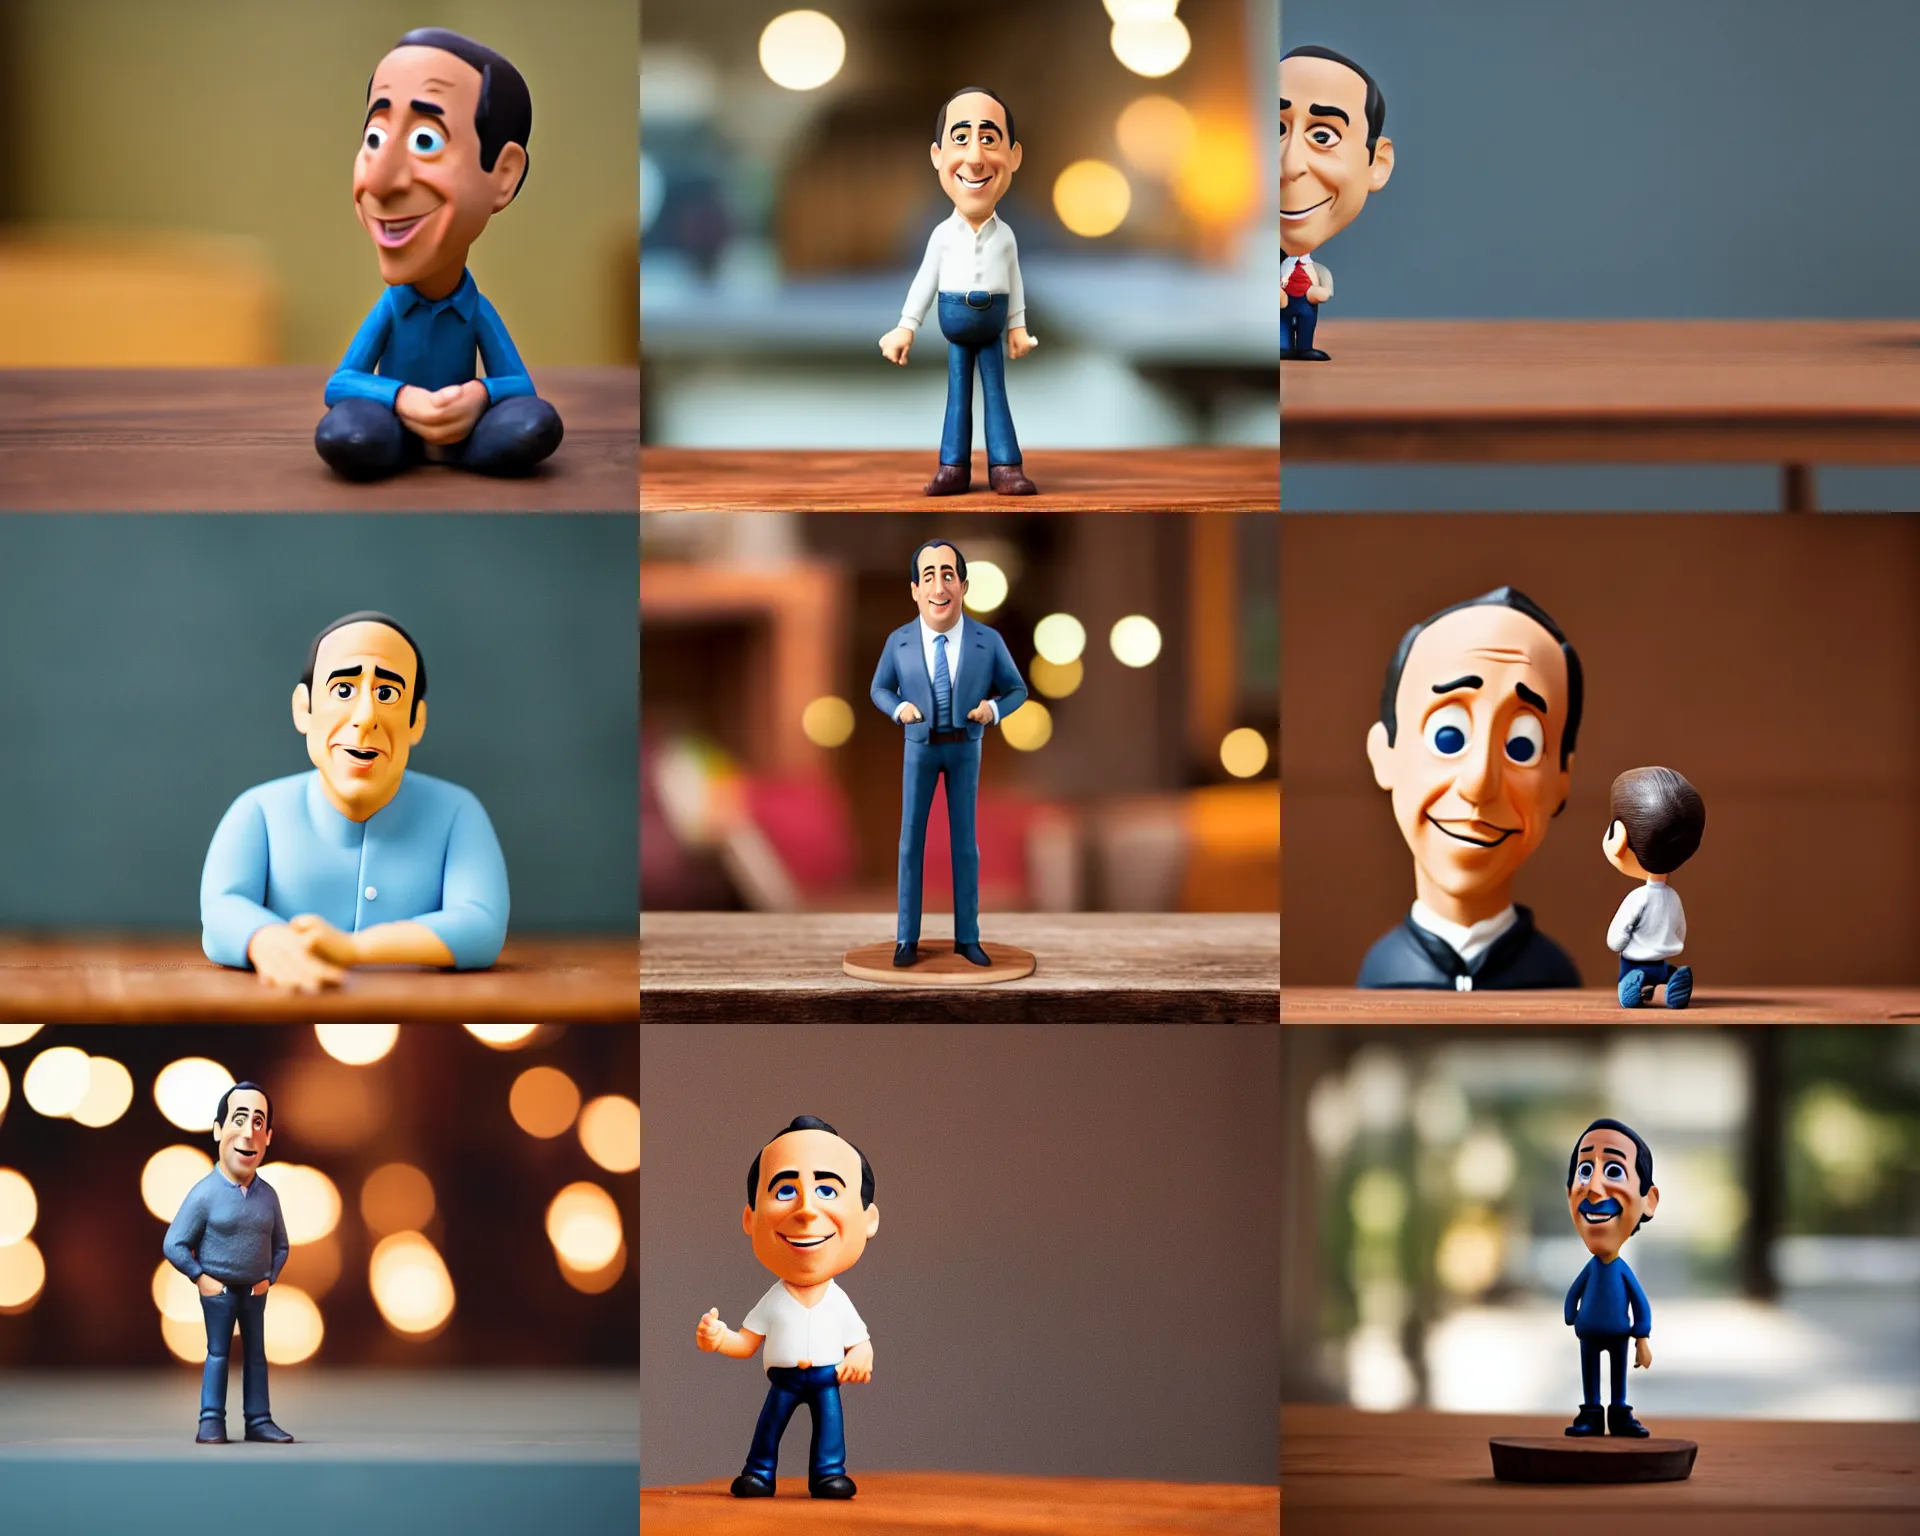 Prompt: jerry seinfeld figurine by pixar sad bokeh on wooden table.